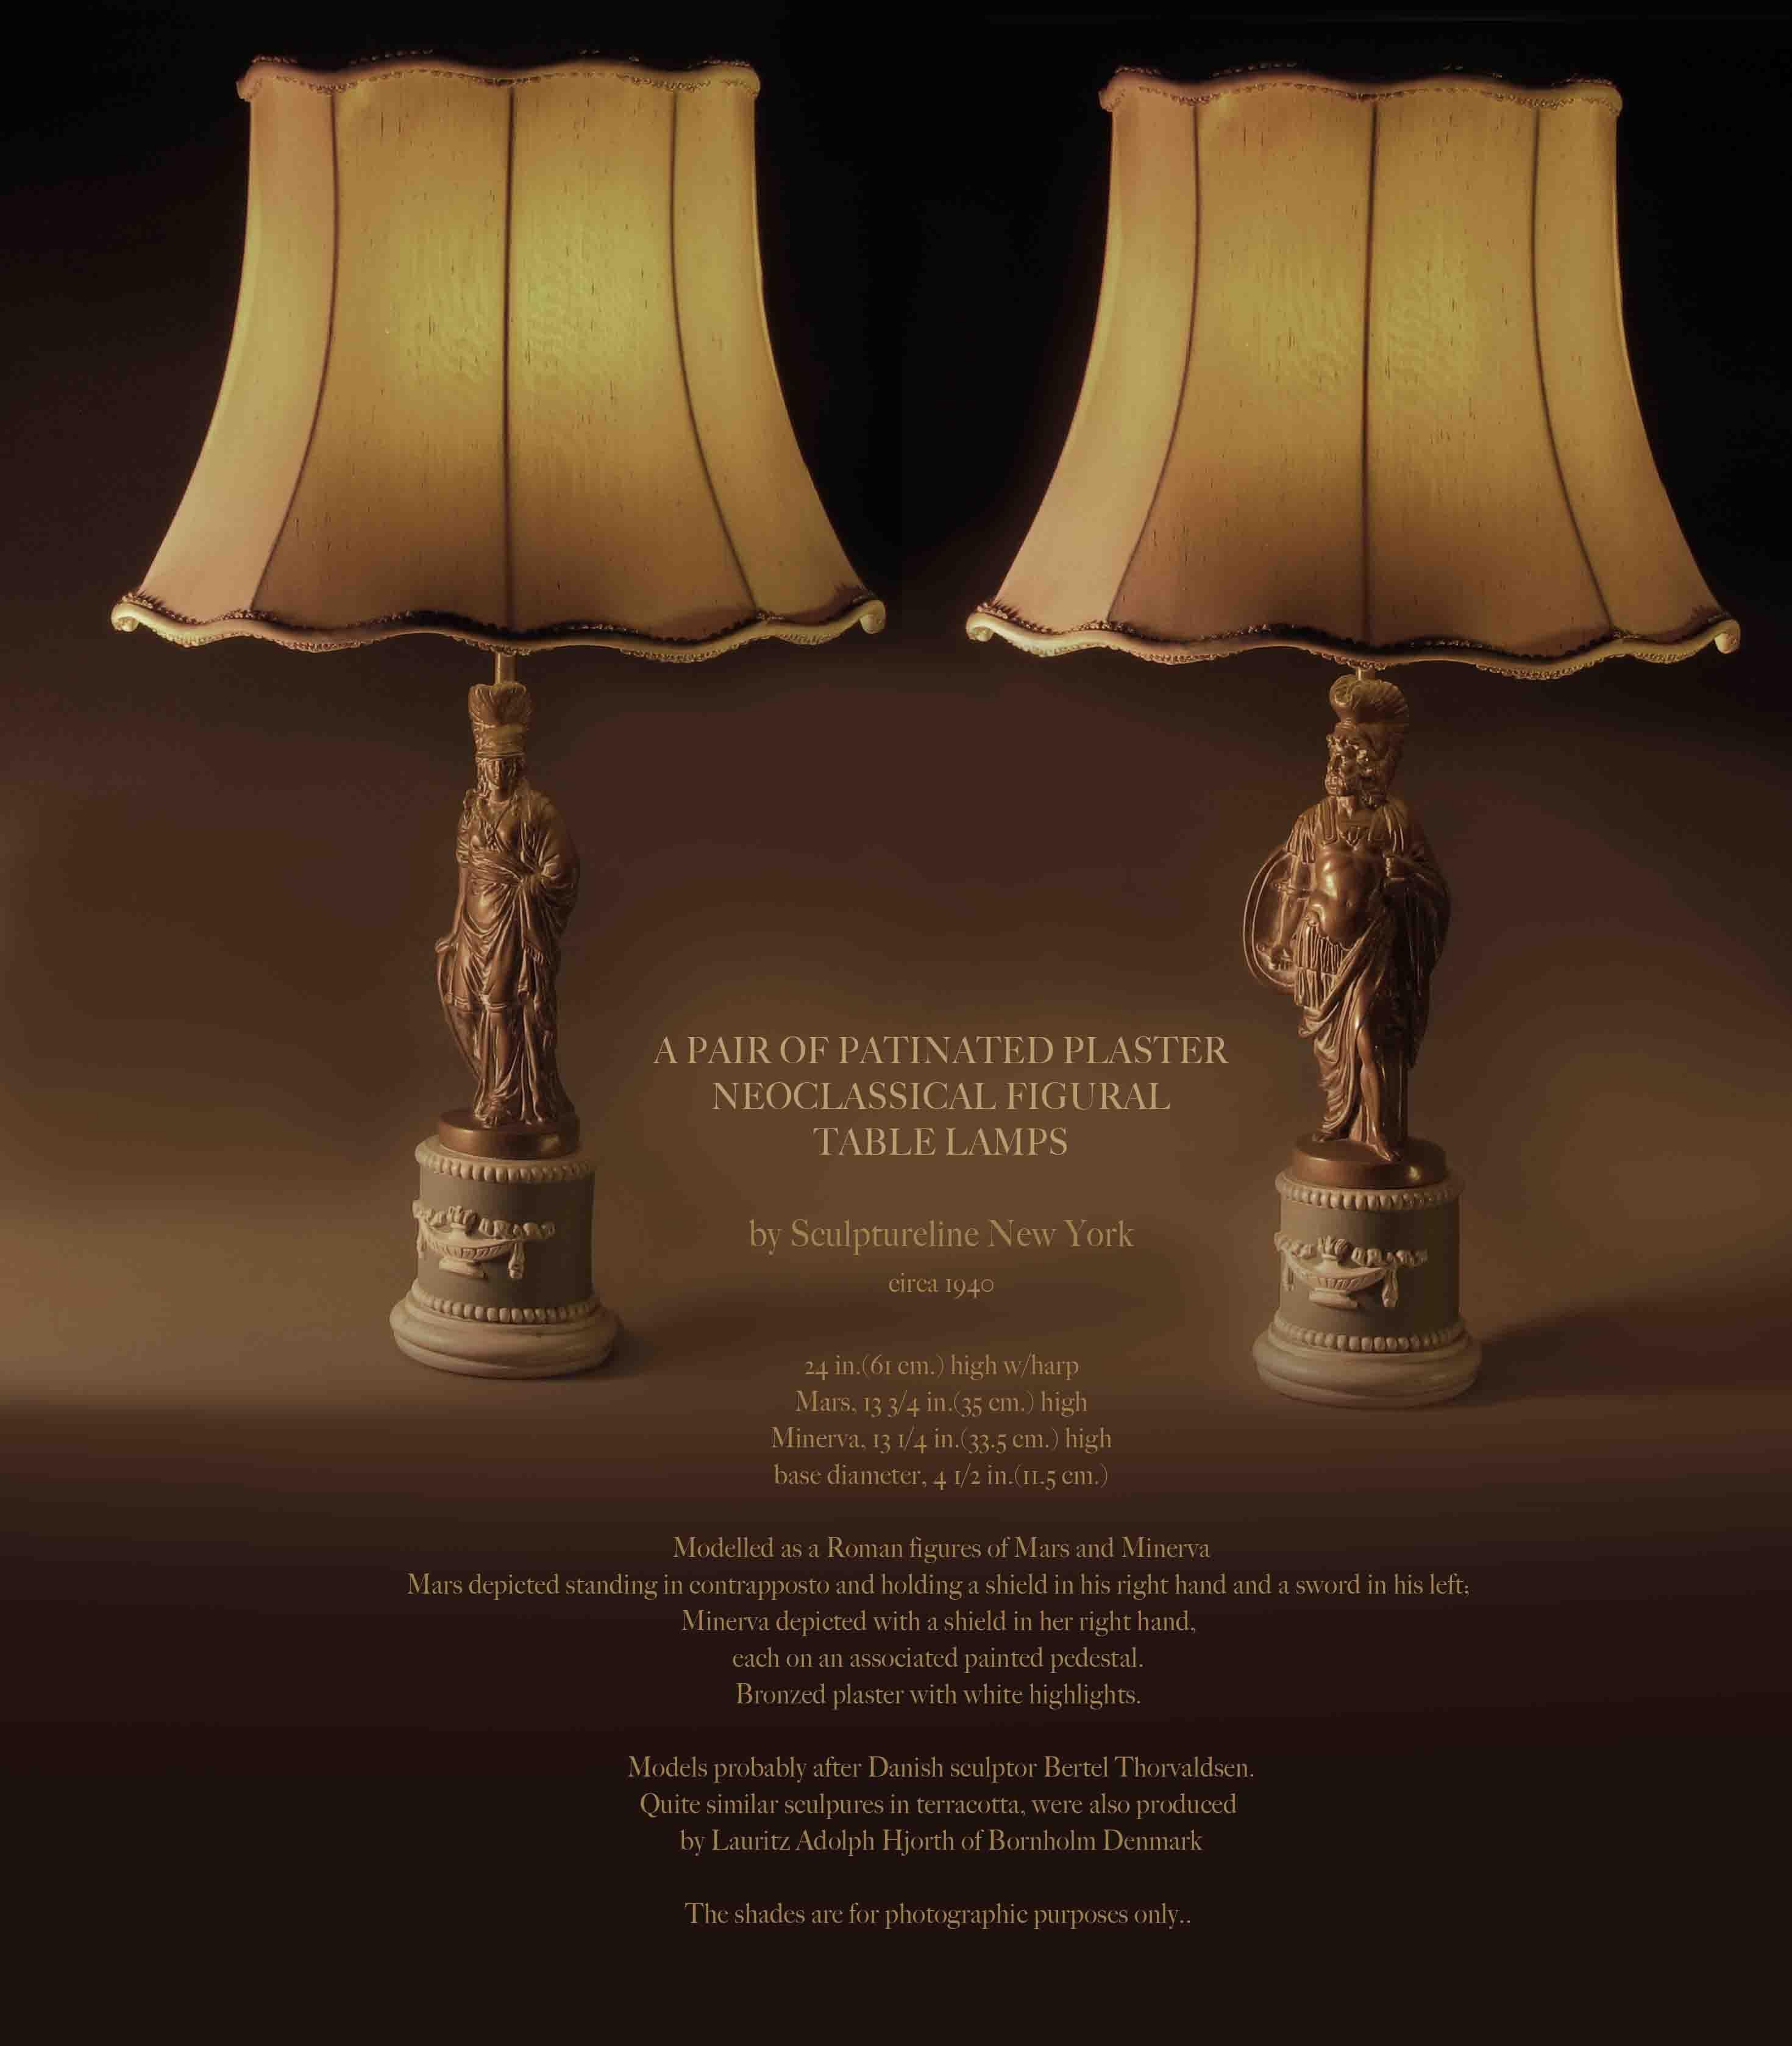 A pair of patinated plaster
Neoclassical figural
Table lamps

By sculptureline New York
circa 1940.

Measures: 24